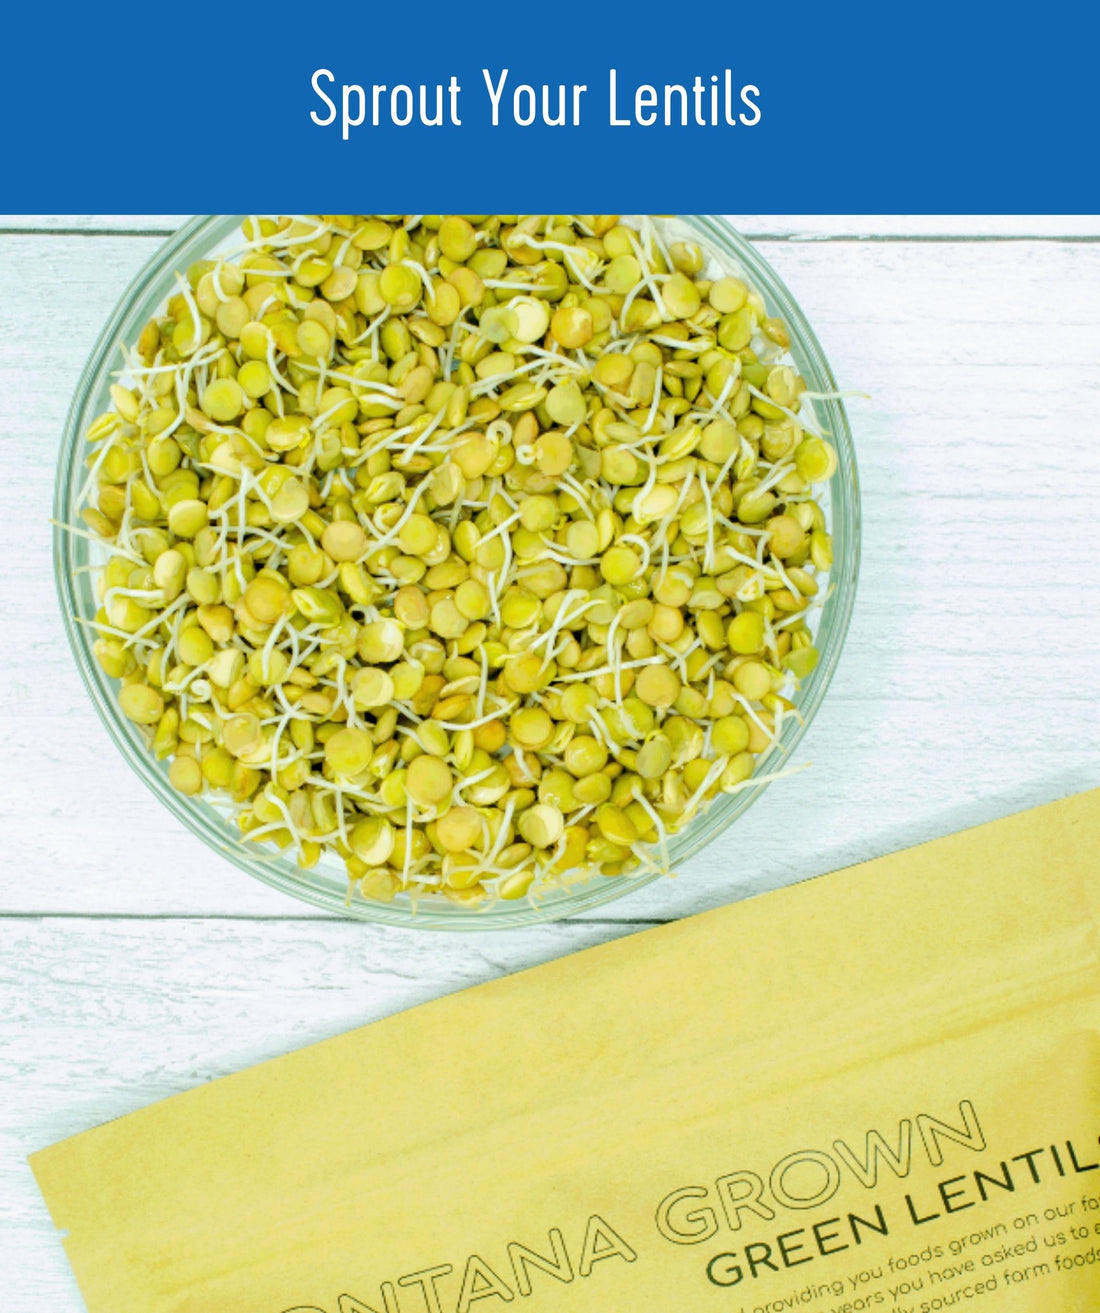 How to Sprout Montana Grown Green Lentils